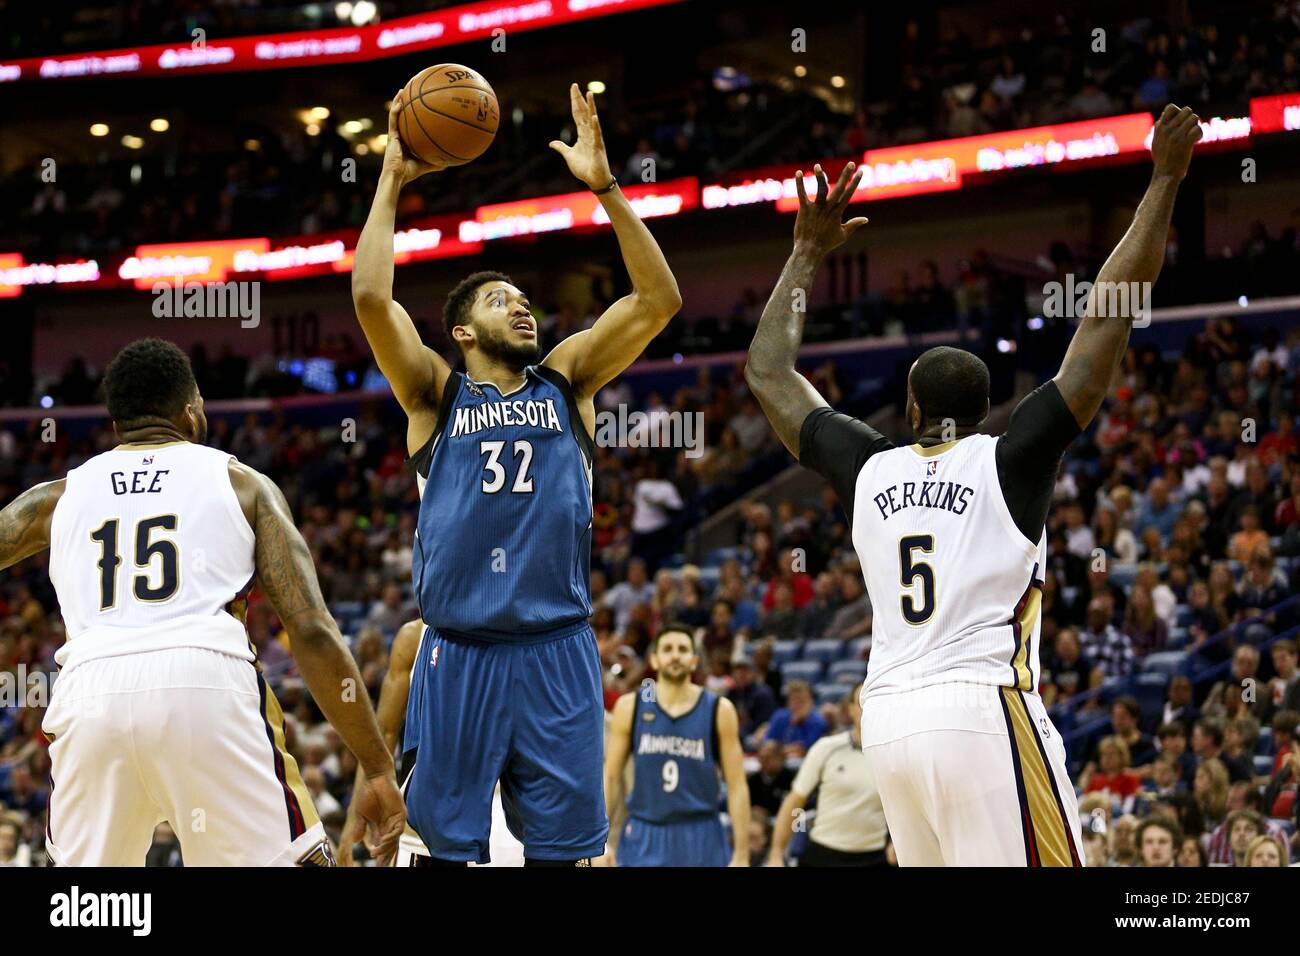 Feb 27, 2016; New Orleans, LA, USA; Minnesota Timberwolves center Karl-Anthony Towns (32) shoots over New Orleans Pelicans center Kendrick Perkins (5) during the first half of a game at  the Smoothie King Center. Mandatory Credit: Derick E. Hingle-USA TODAY Sports  / Reuters  Picture Supplied by Action Images   (TAGS: Sport Basketball NBA) *** Local Caption *** 2016-02-28T013144Z 1495680546 NOCID RTRMADP 3 NBA-MINNESOTA-TIMBERWOLVES-AT-NEW-ORLEANS-PELICANS.JPG Stock Photo